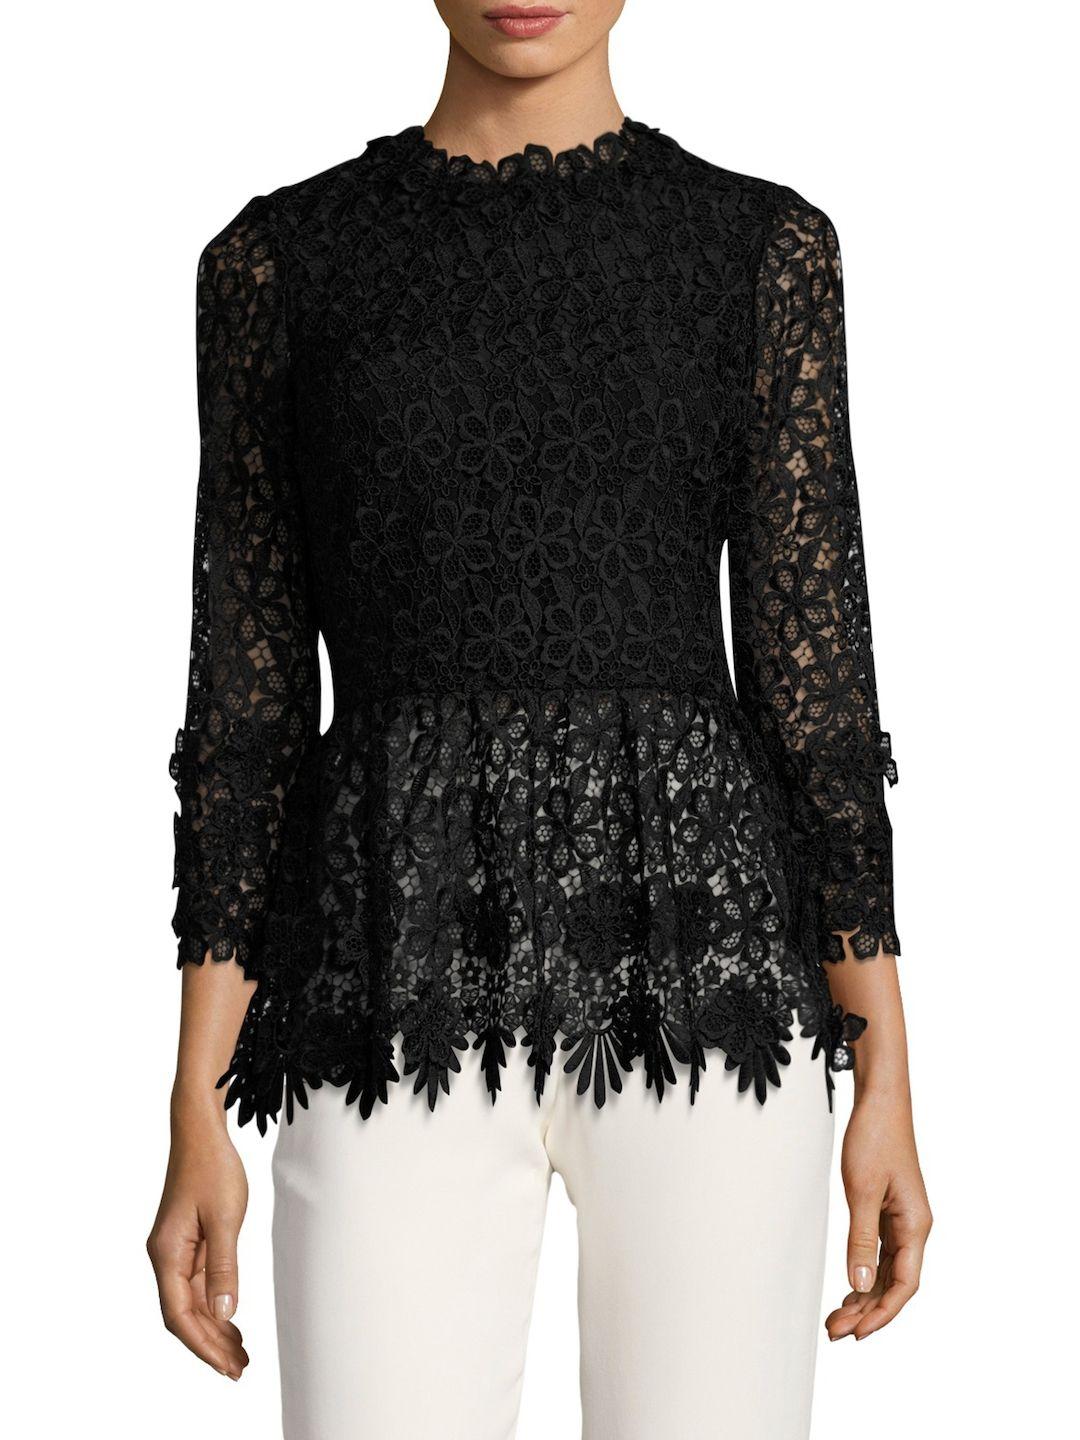 NWT Oscar de la Renta Black Guipure Lace Top Blouse
F/W 2016 Collection
US size - 8
Black Rich Flower Lace with Flower Applications, 3/4 Sleeve, Scalloped Peplum Hem, Fully Lined, Side Zip Closure.
Measurements: Length - 27 inches, Bust - 34